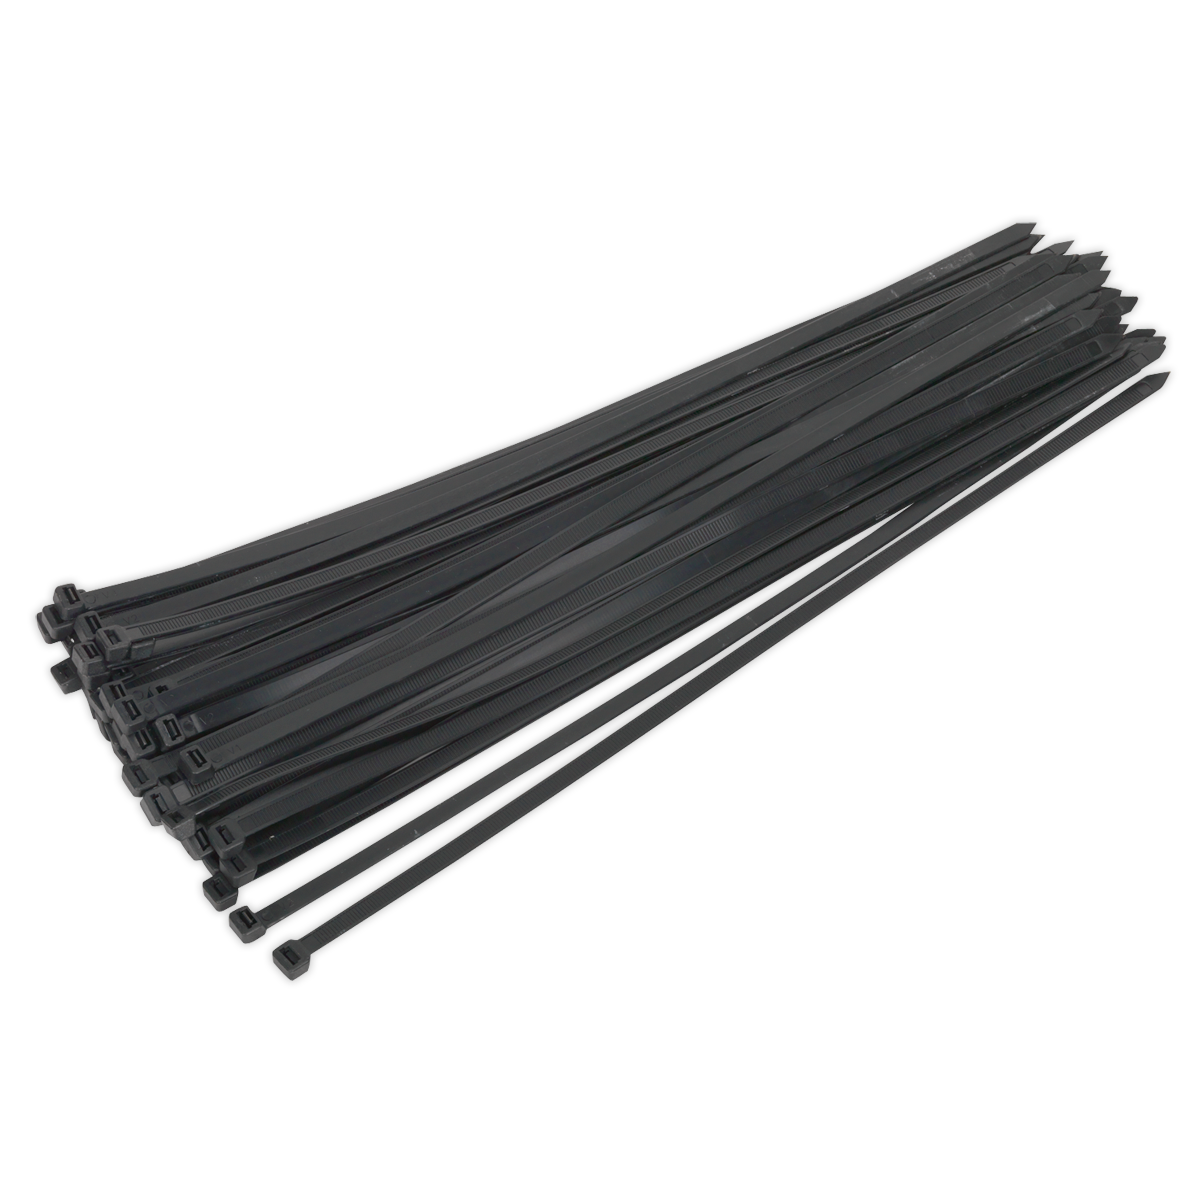 Cable Tie 650 x 12mm Black Pack of 50 - CT65012P50 - Farming Parts